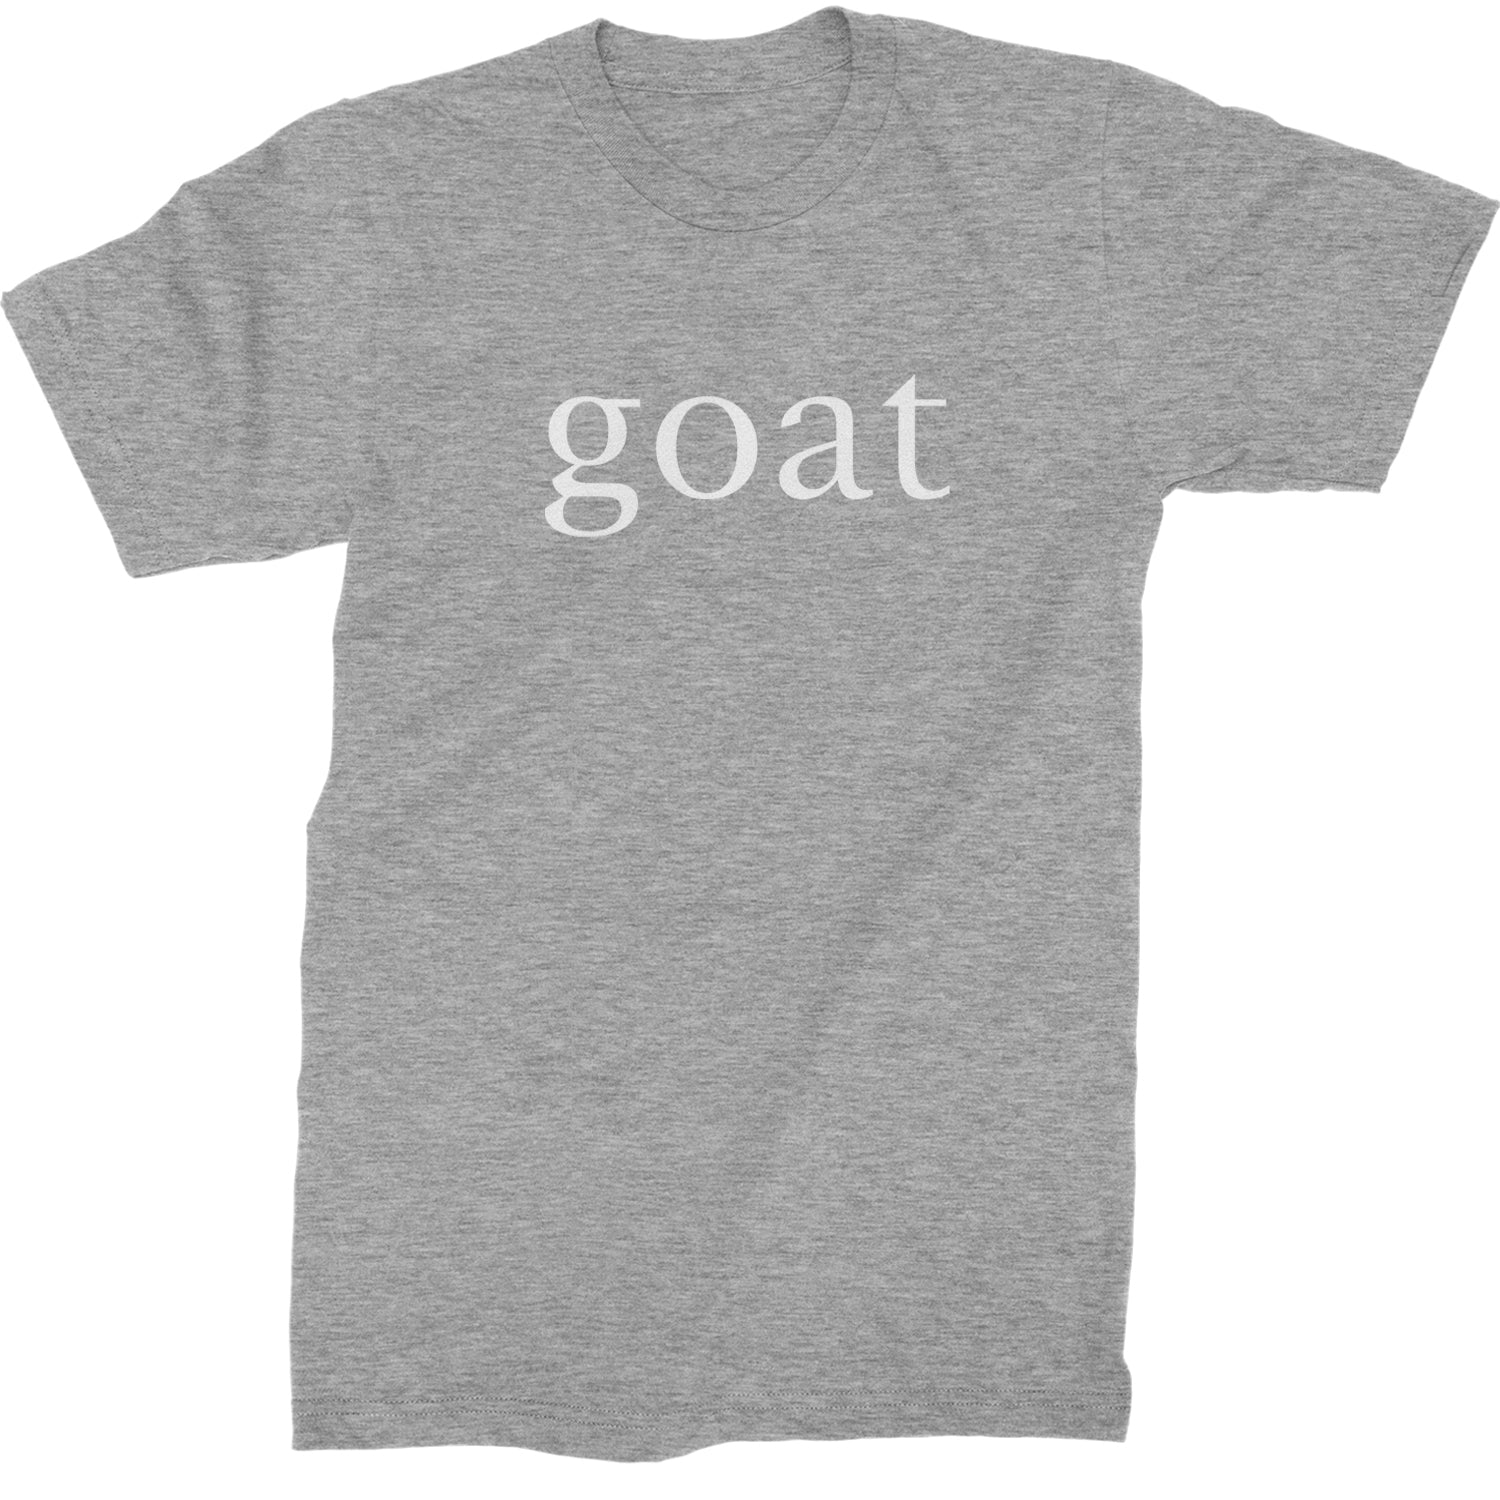 GOAT - Greatest Of All Time  Mens T-shirt Heather Grey